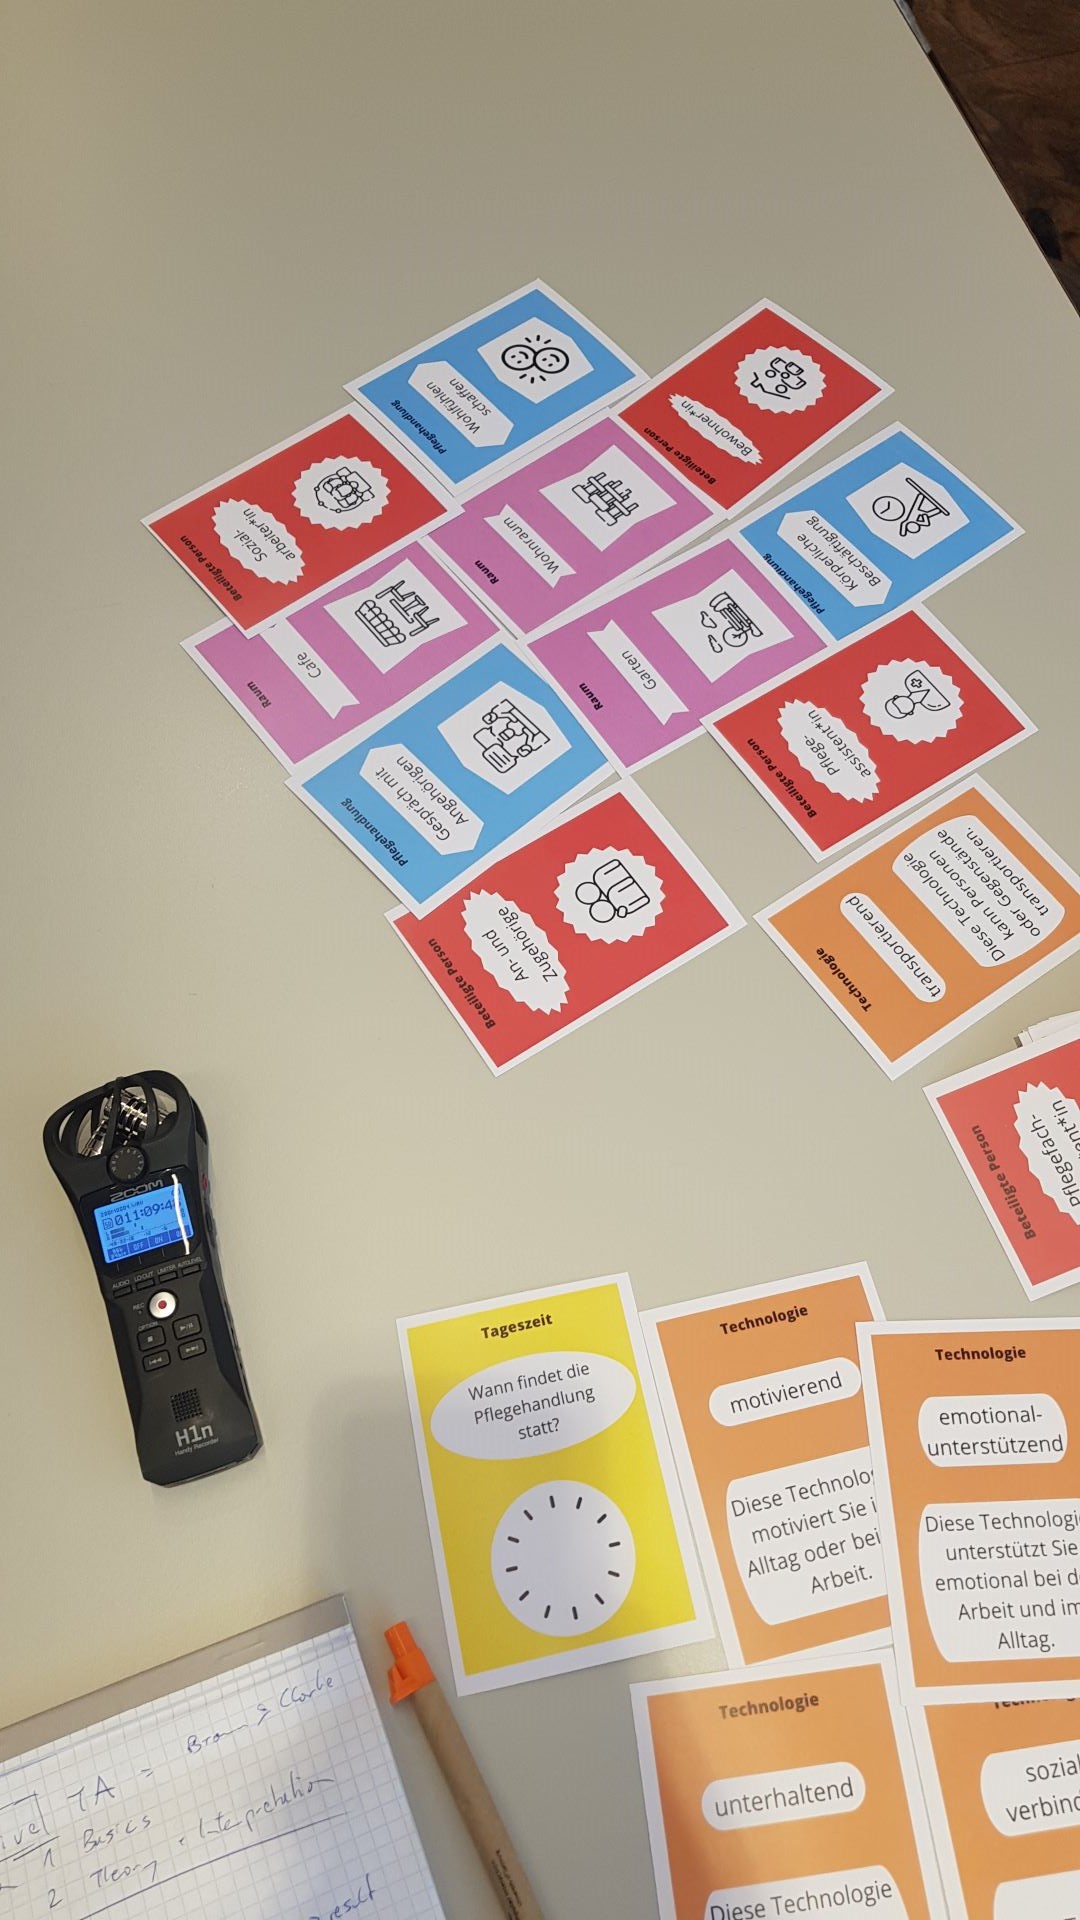 Picture taken during card workshops, with audio recorder and cards on care actions on the table